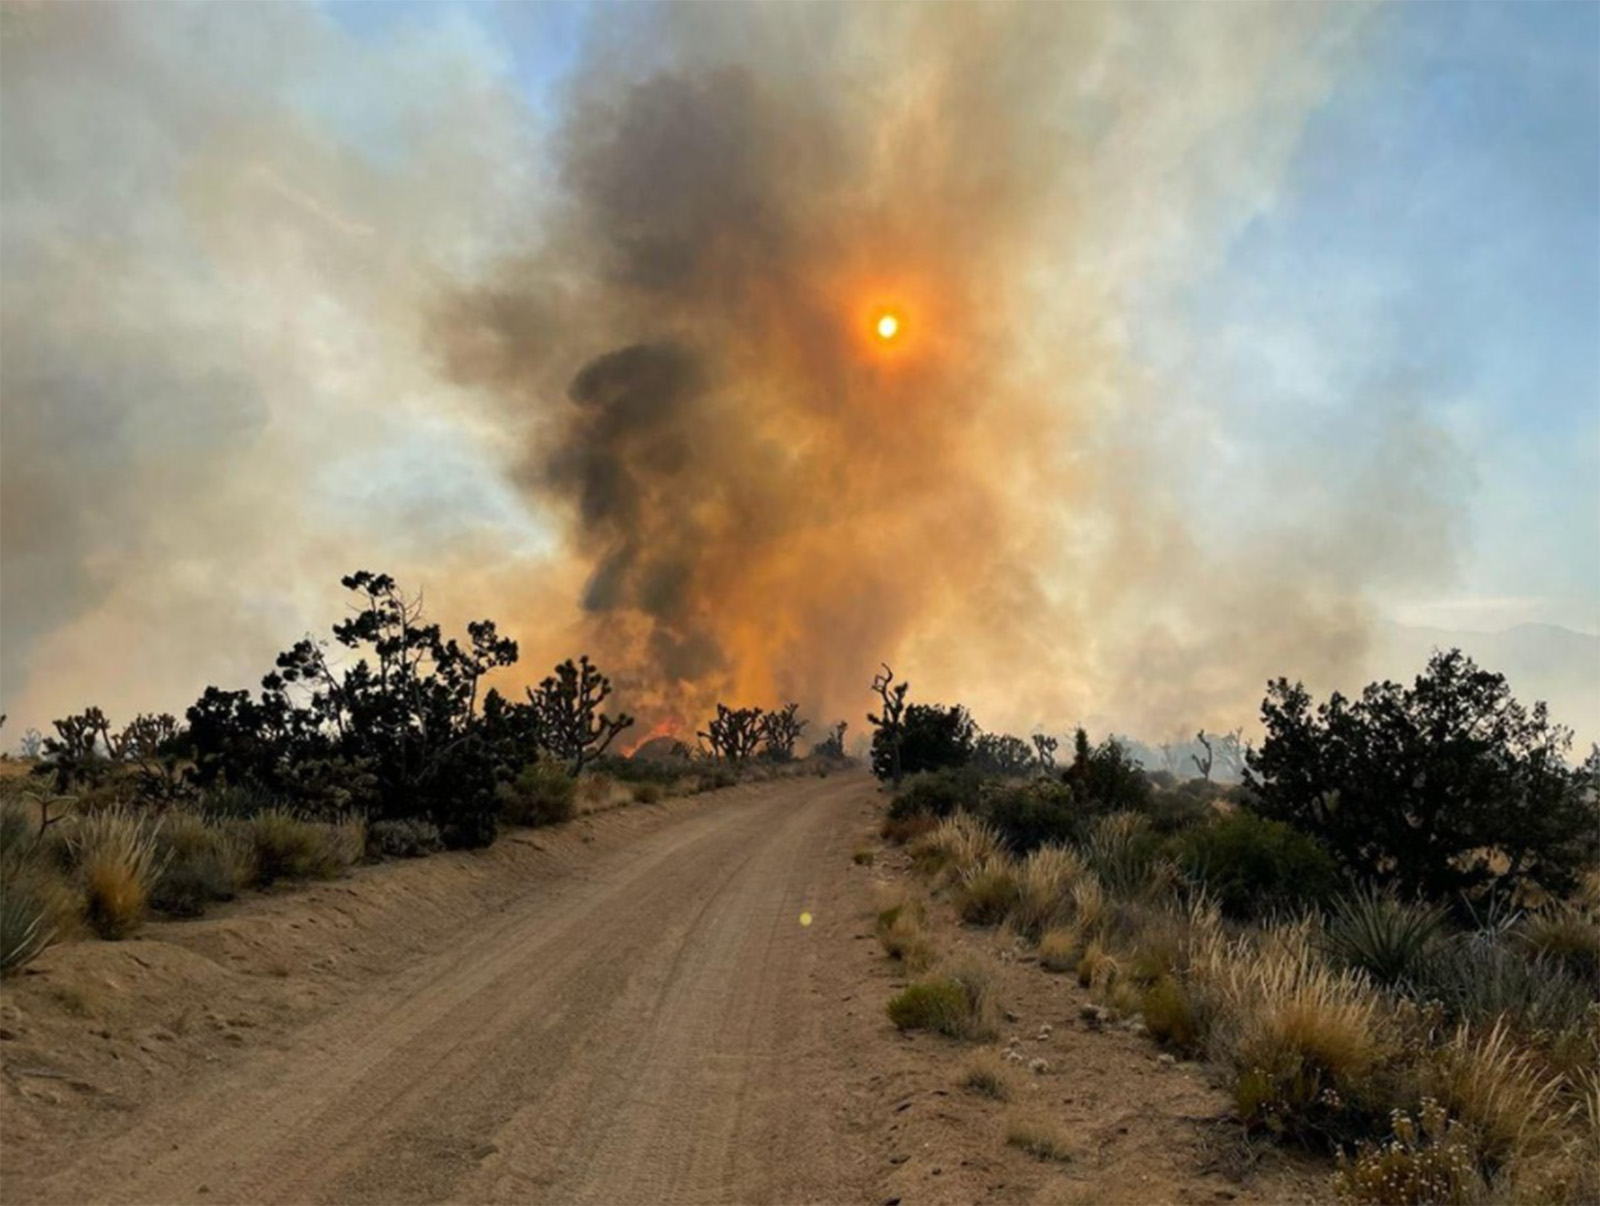 A column of smoke partially obscures the sun while looking down a dirt road in the desert